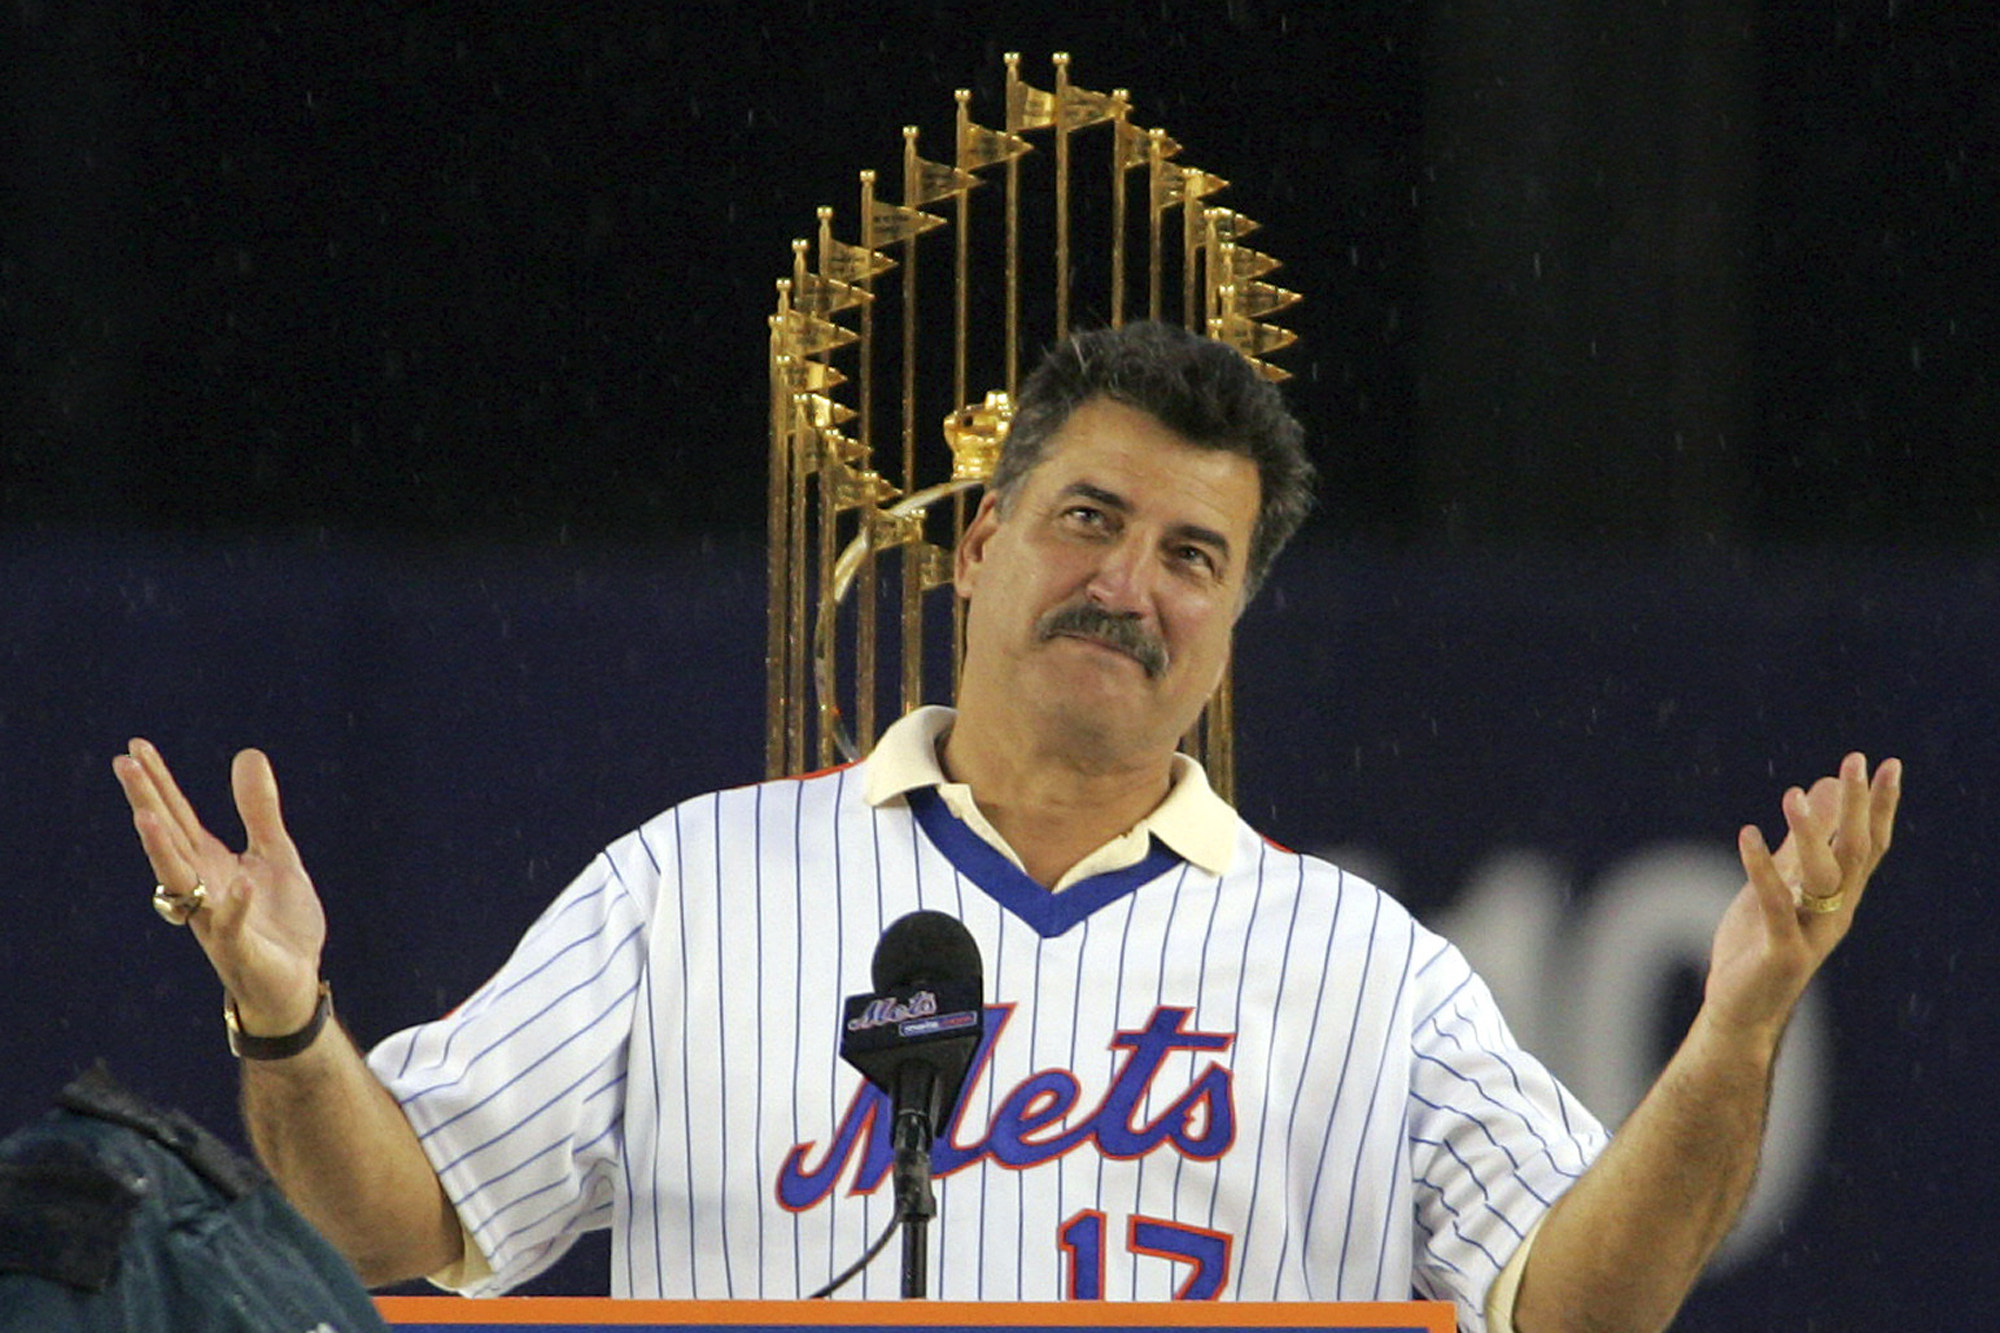 Why don't the Mets retire more jersey numbers? – Mets360